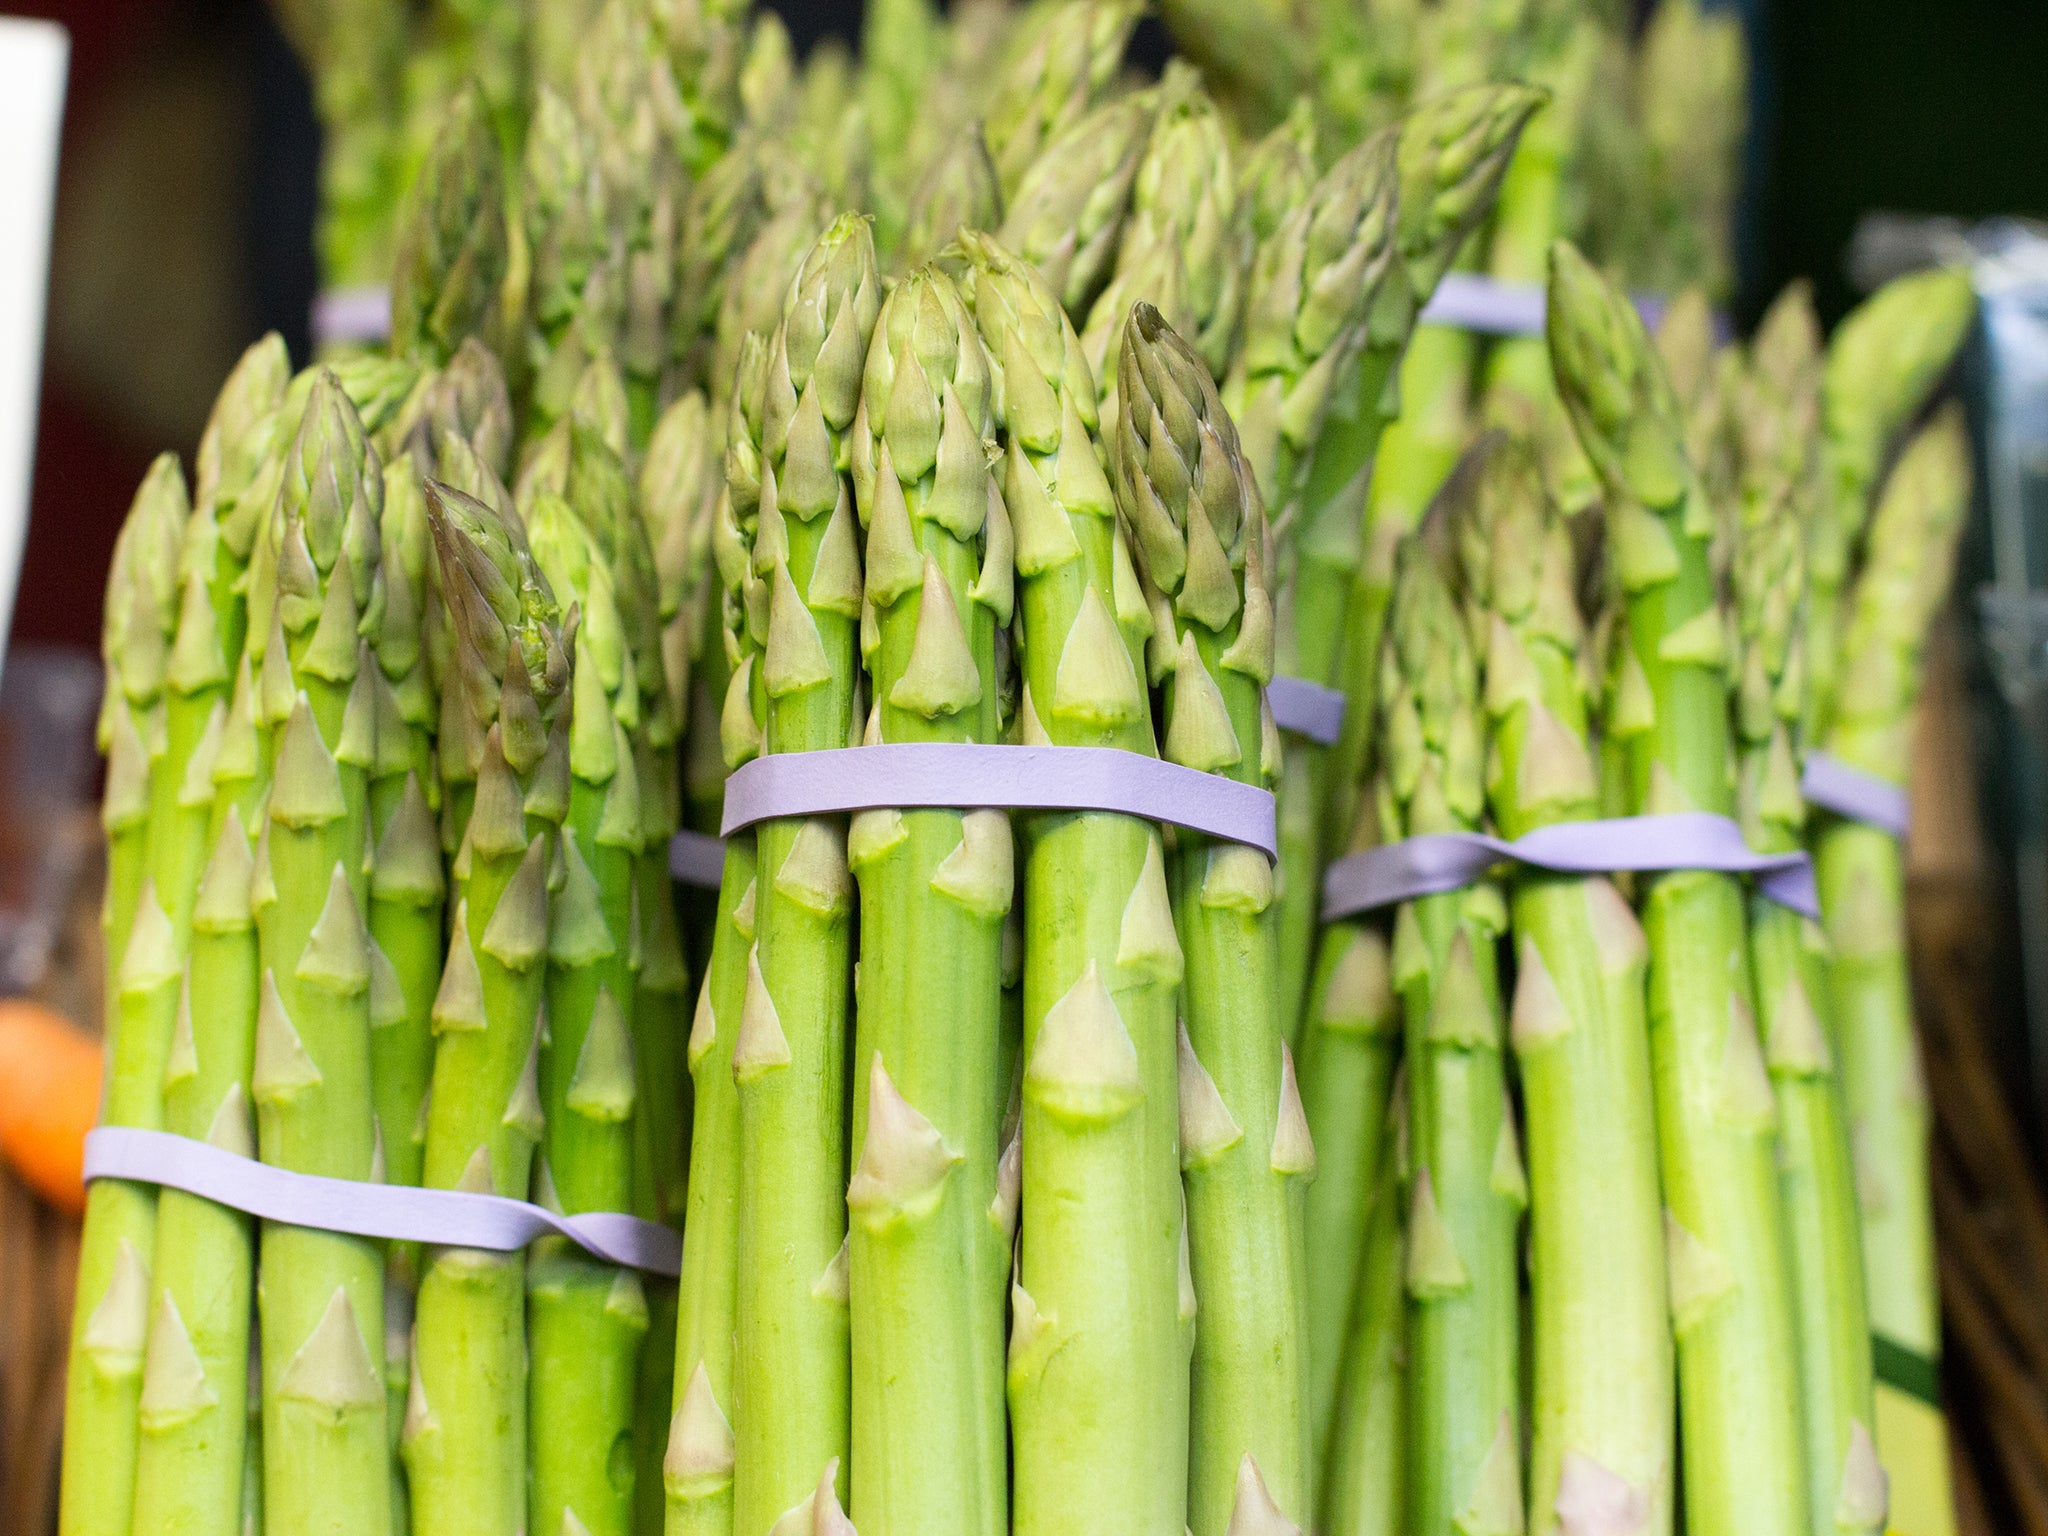 Asparagus tastes best and sweetest when eaten as soon as possible after being cropped